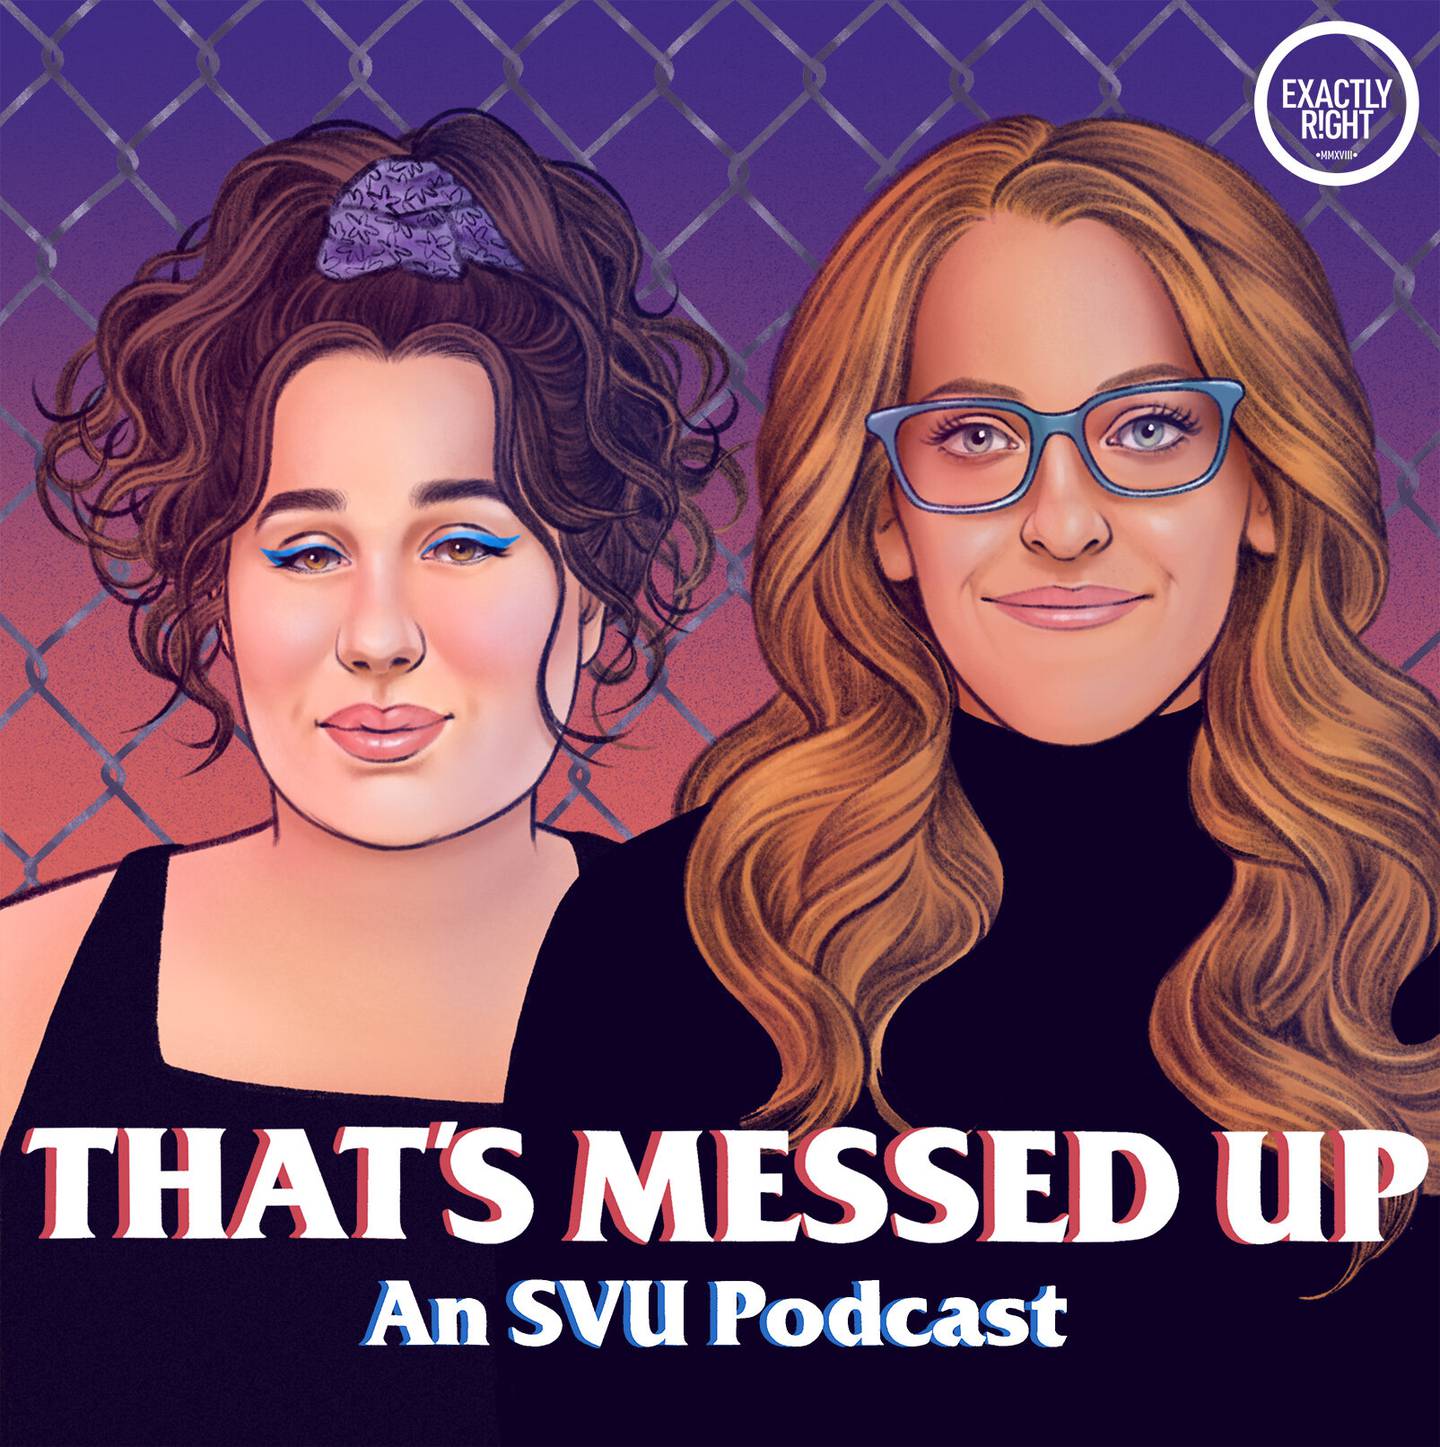 Beloved, long-running police procedural 'Law & Order: SVU' gets the podcast treatment from comedians Liza Treyger and Kara Klenk. Photo: Exactly Right Media